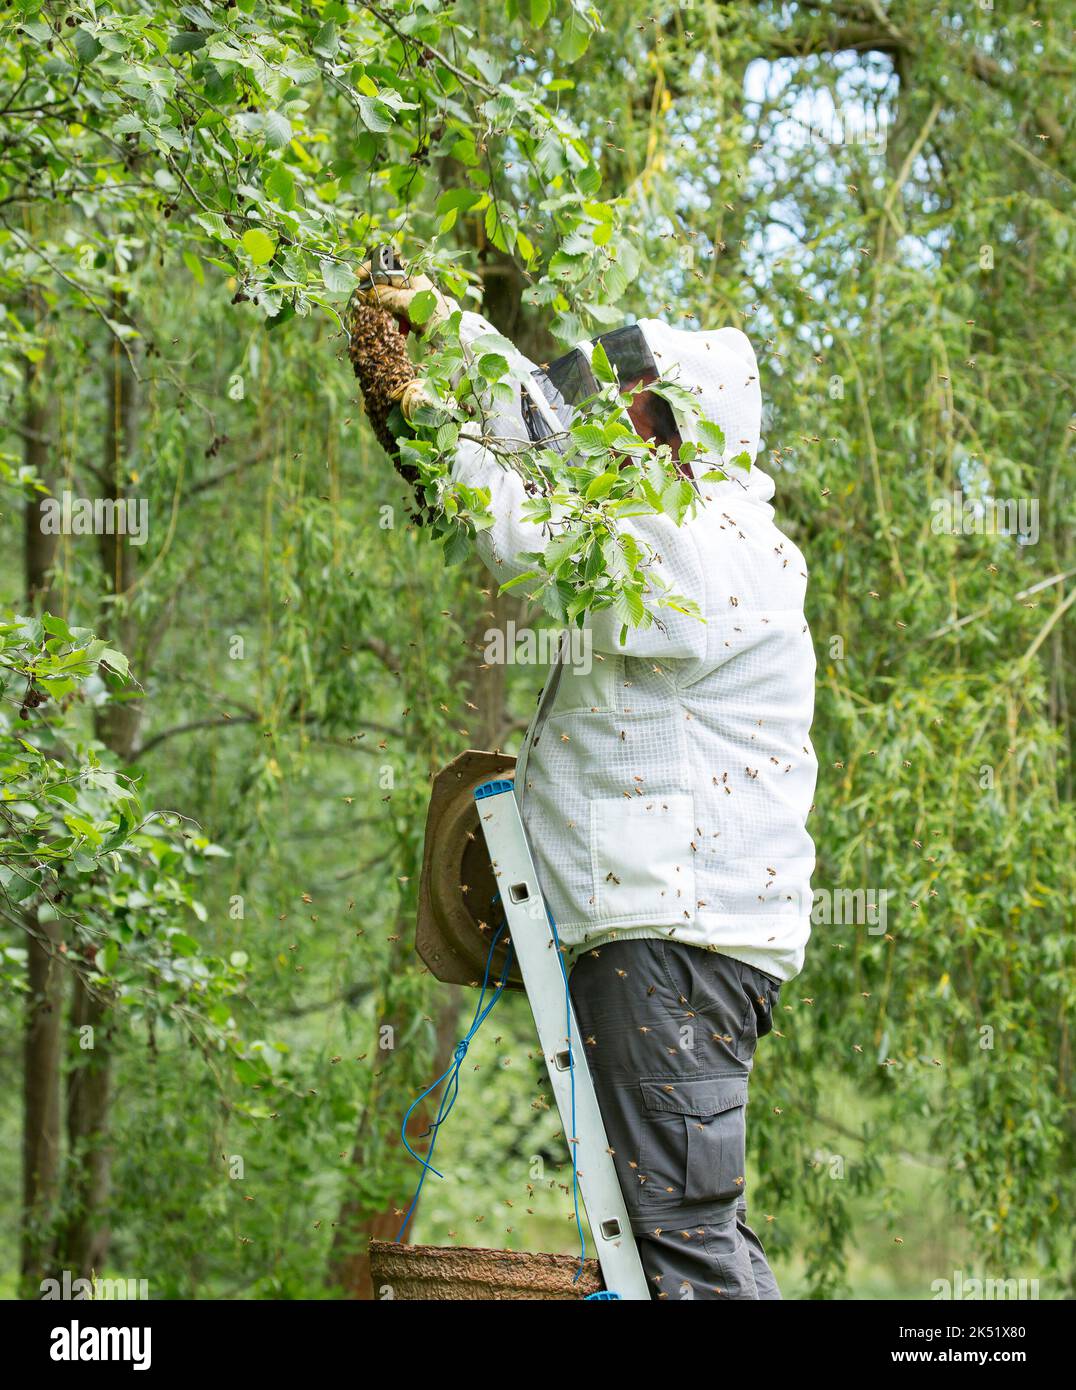 Man in protective bee keeper clothing removing a cluster of wild honey bees from their temporary home in the tree of a public UK park. Stock Photo